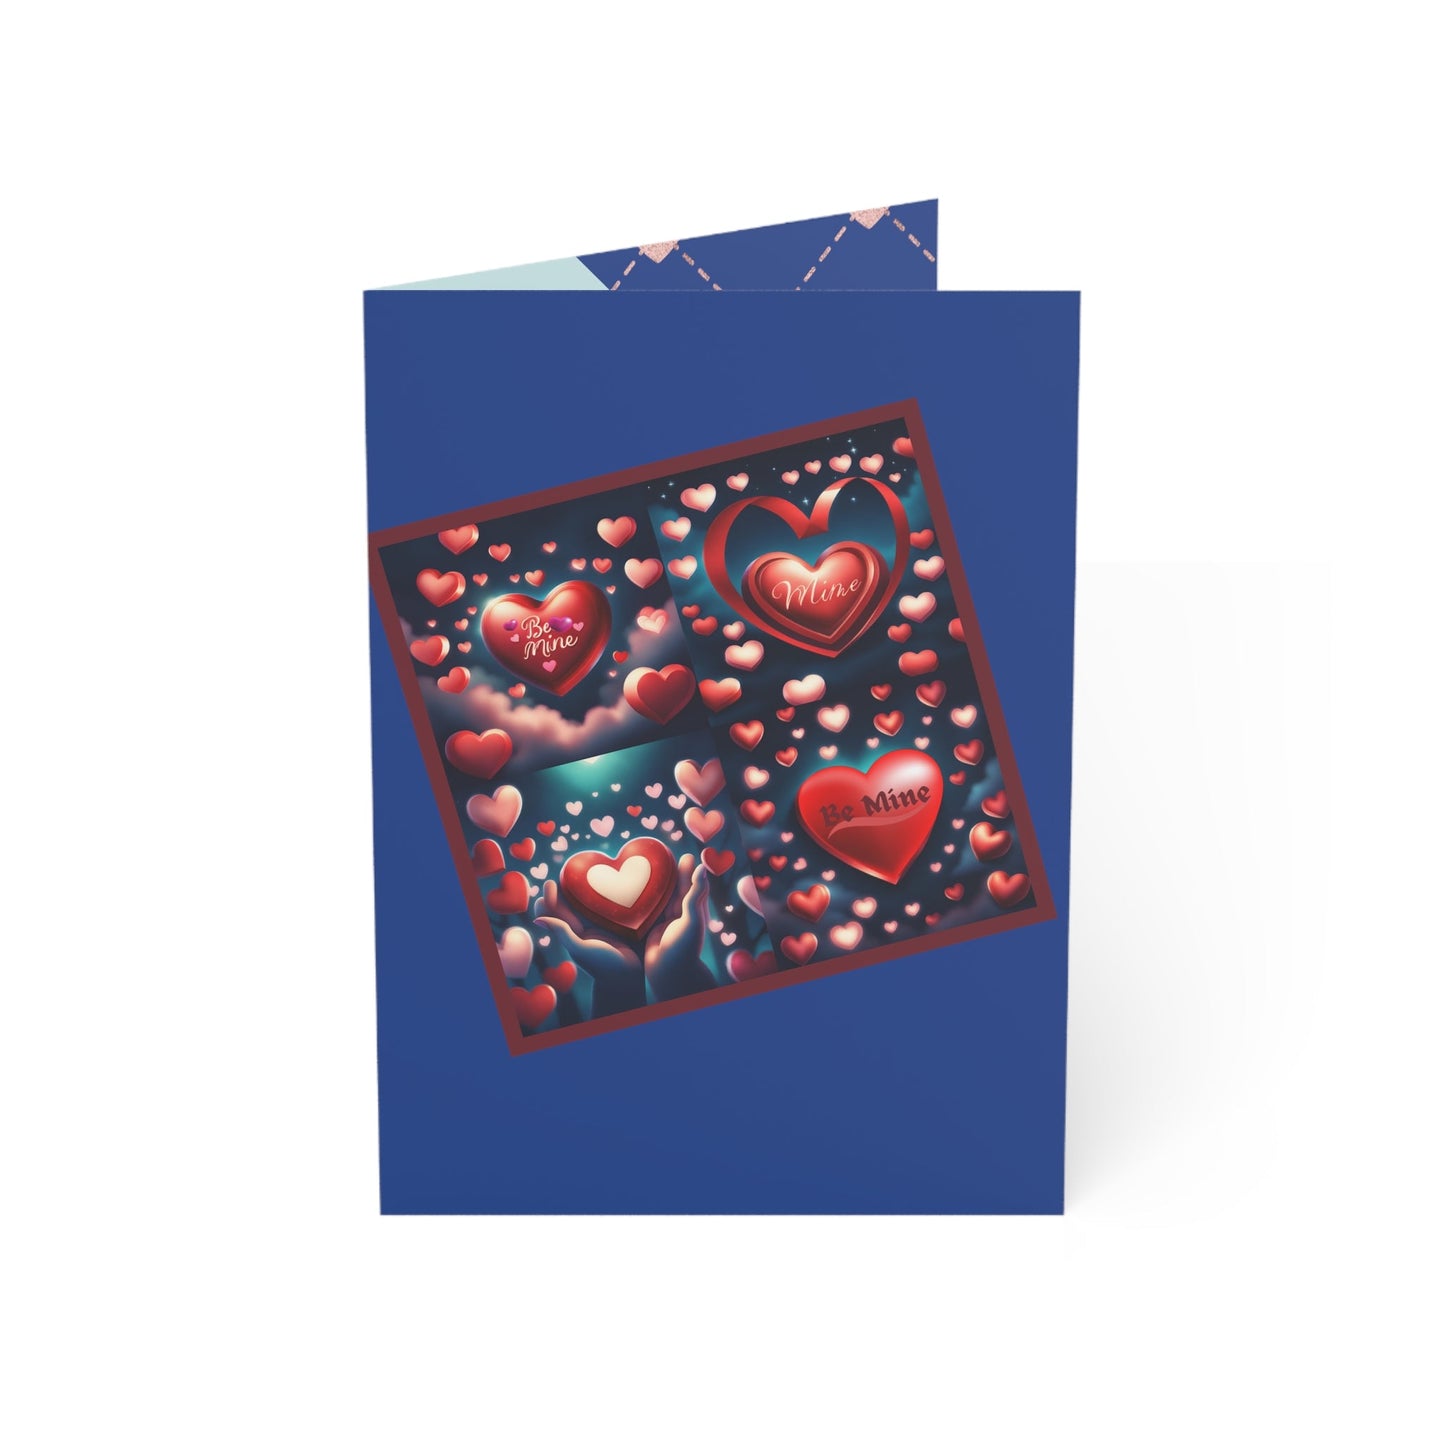 Sweethearts (Blue) Greeting Cards (50pcs)